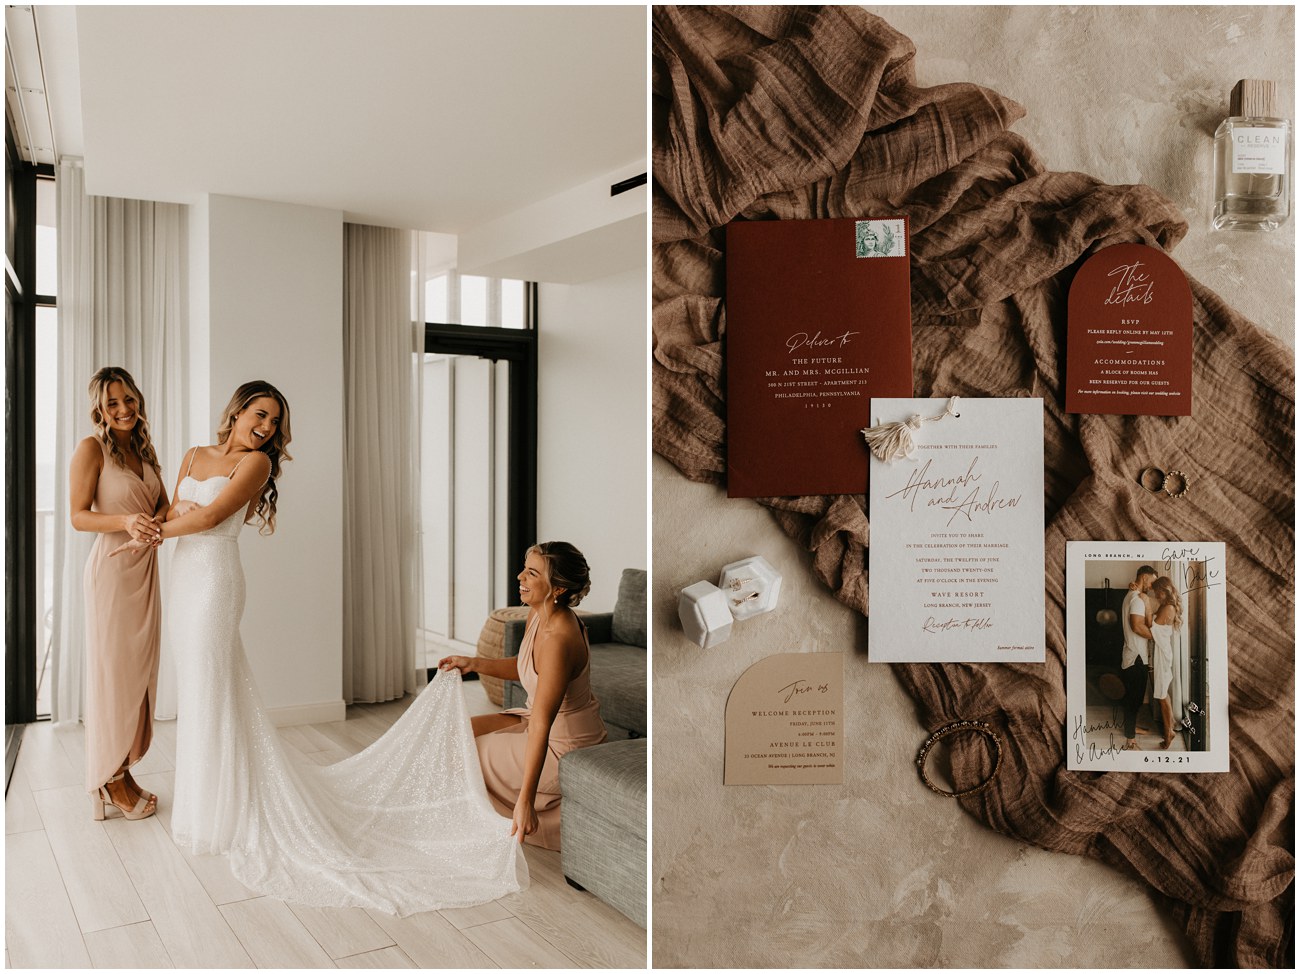 maids of honors fluffing bride's wedding dress and wedding invitation suite